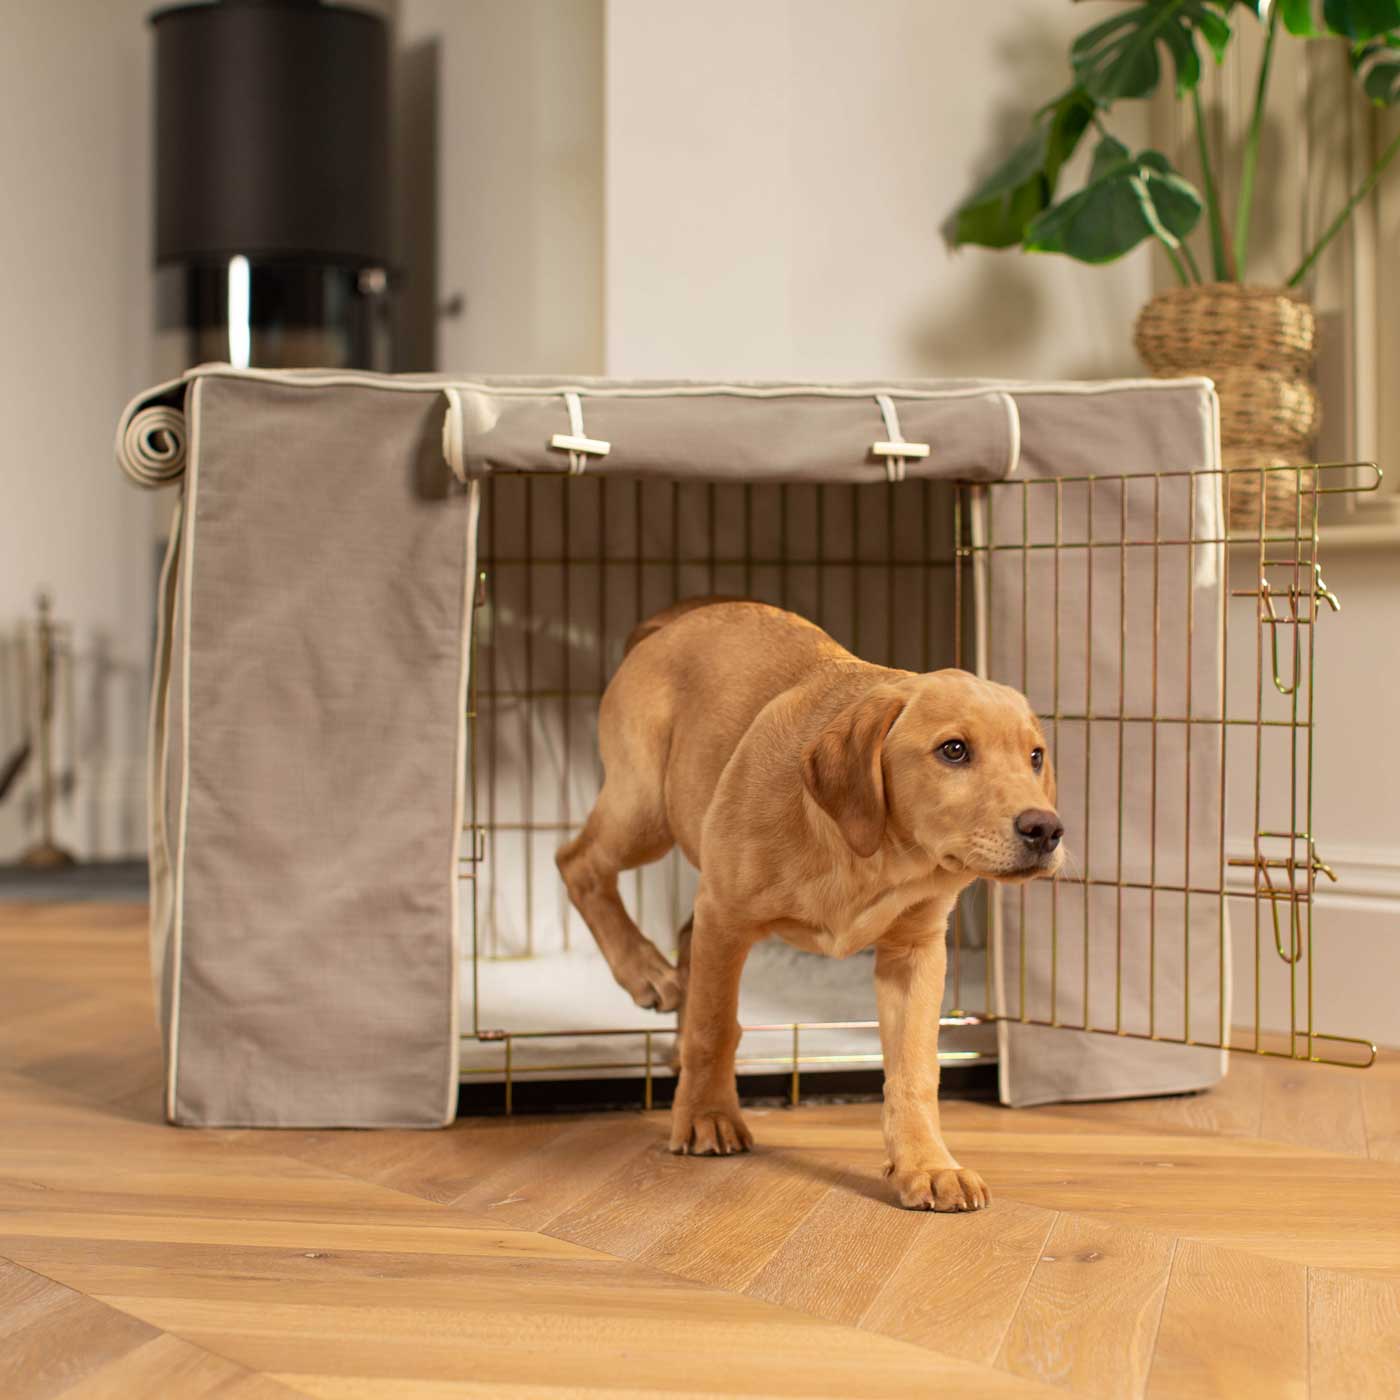 Discover Our Heavy-Duty Dog Crate With Savanna Stone Crate Cover! The Perfect Crate Accessory To Build The Ultimate Pet Den! Available To Personalise Here at Lords & Labradors    